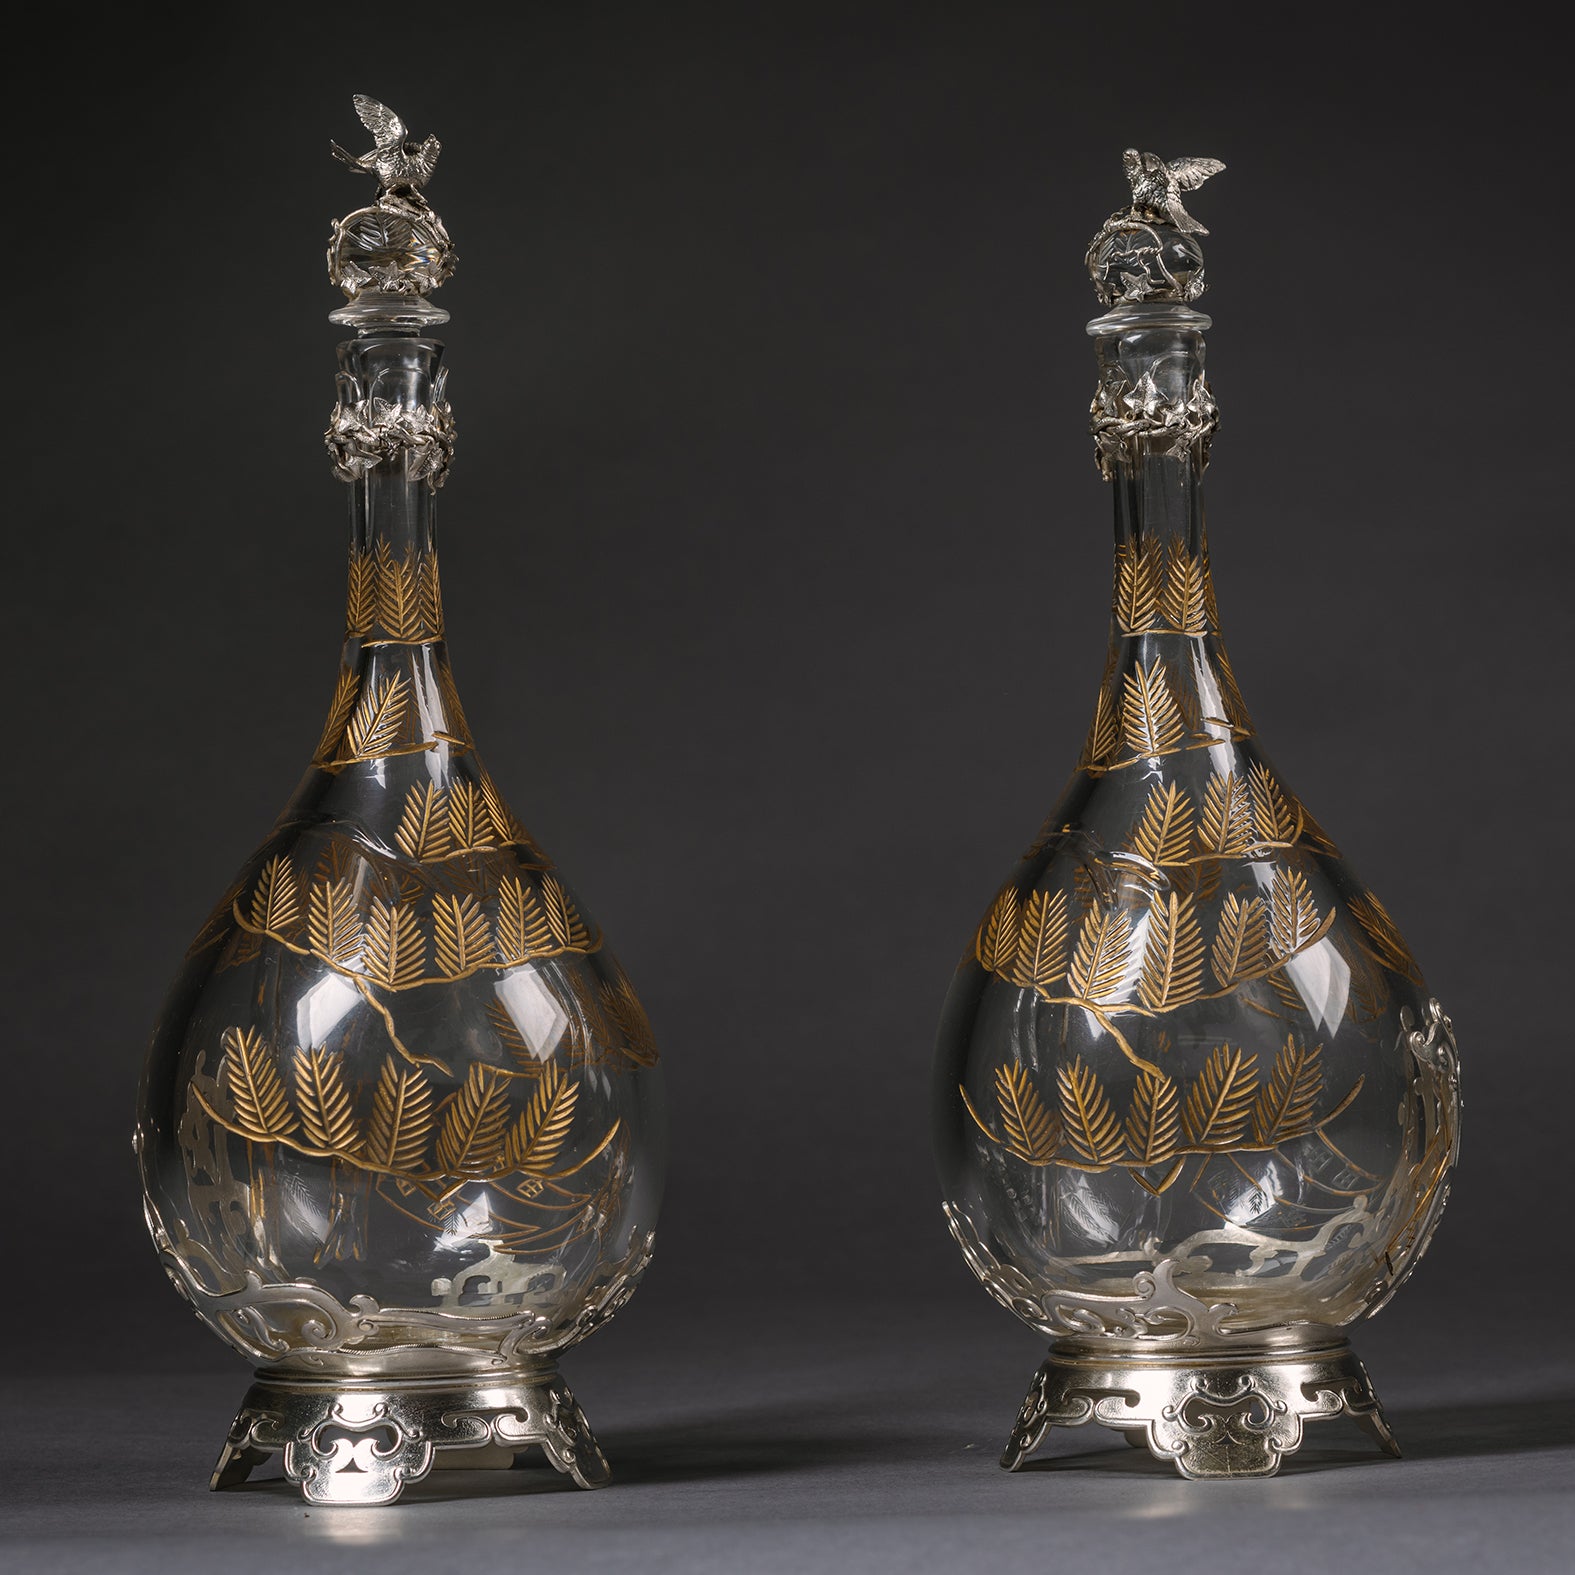 Pair of Silver Plated and Engraved Glass Decanters For Sale